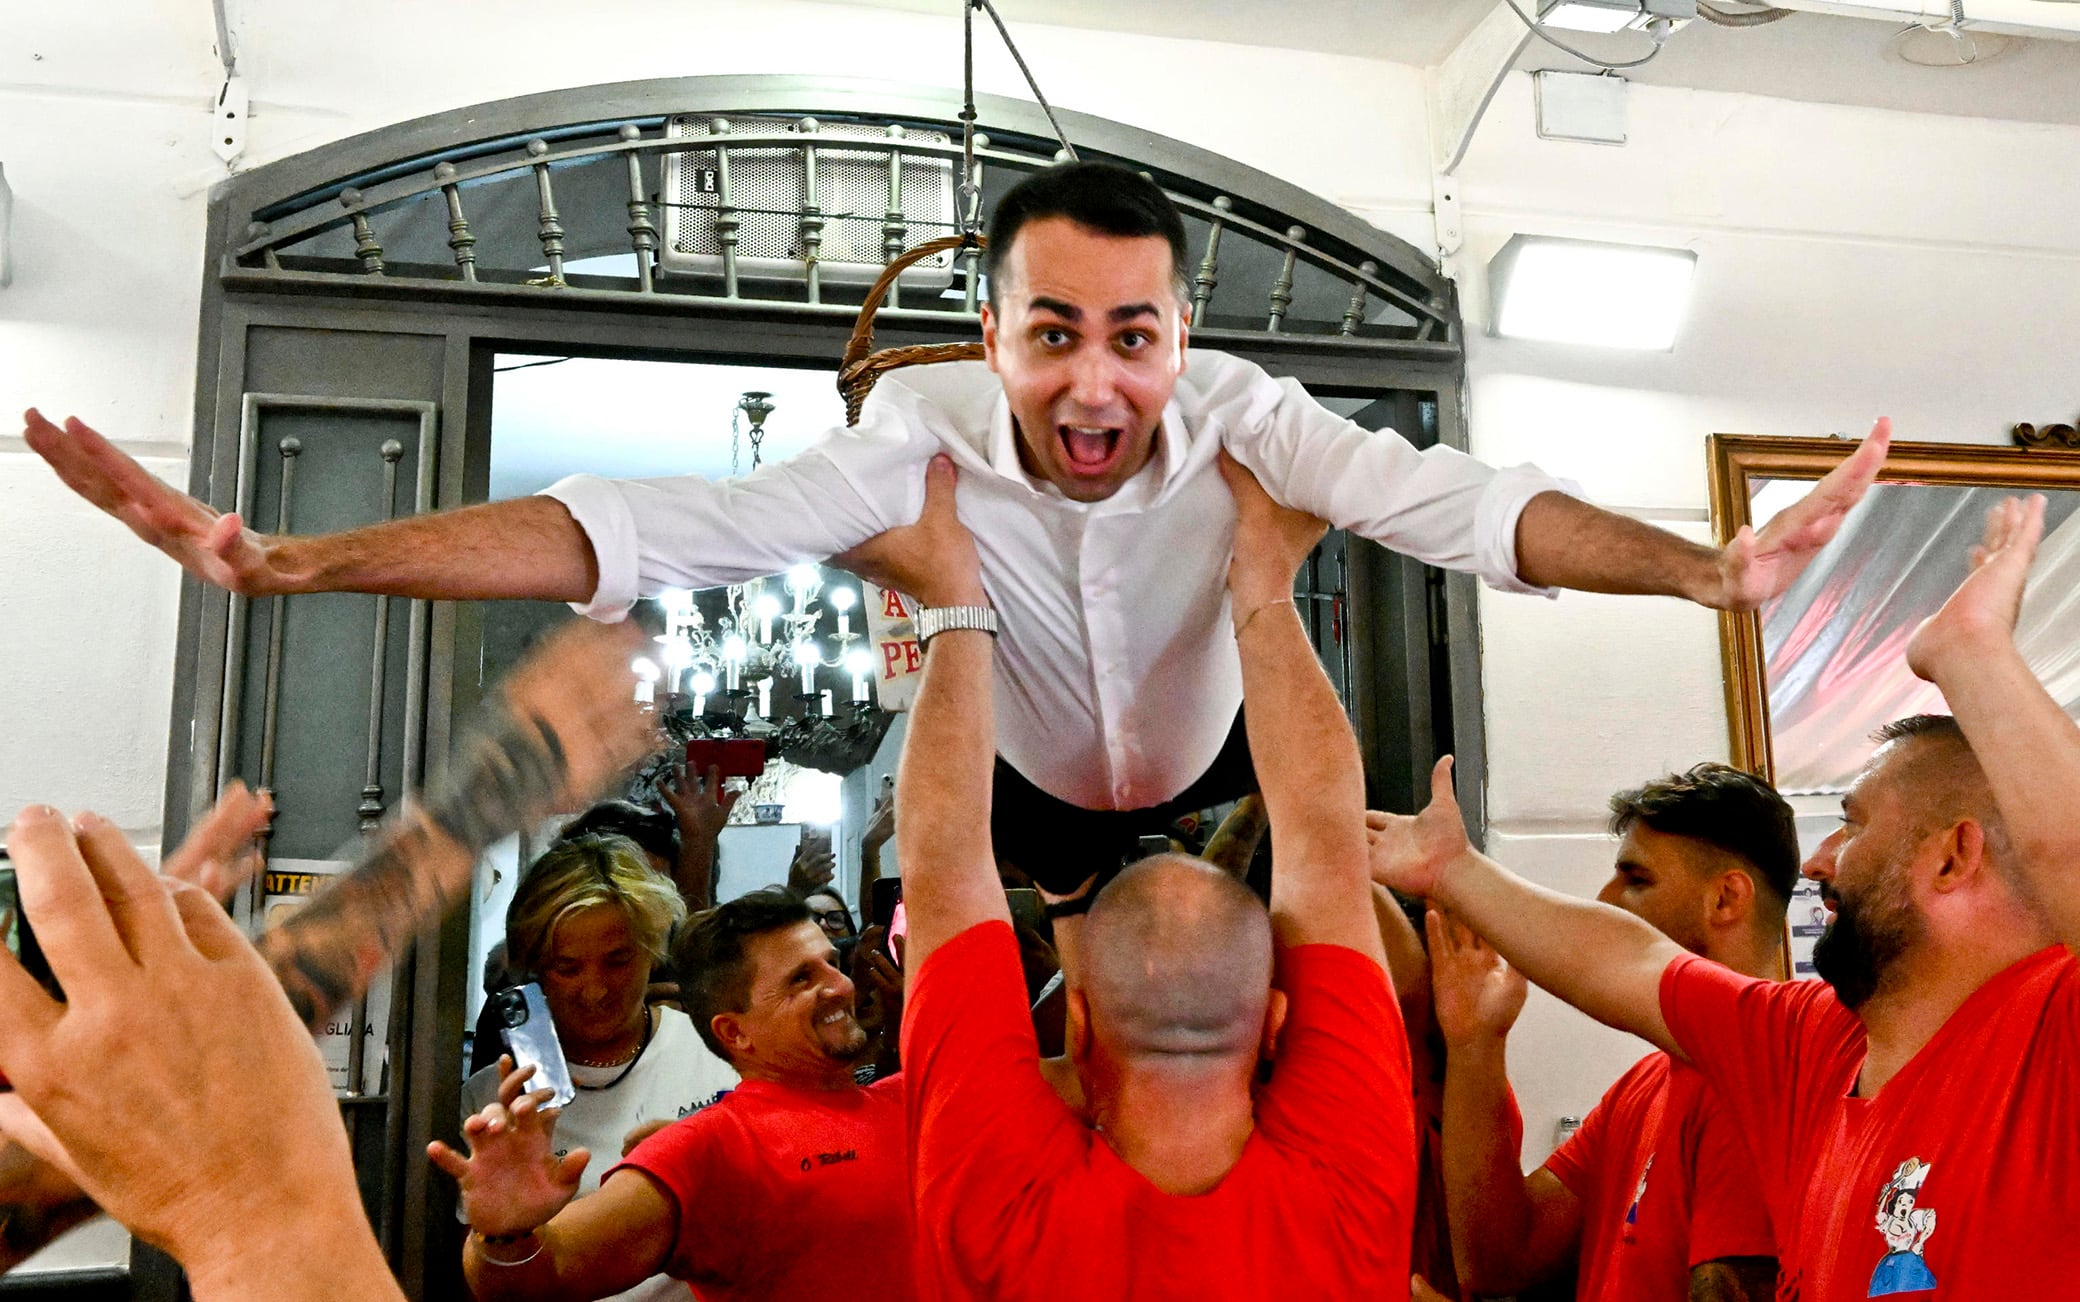 The leader of the Italian party "Impegno Civico" and Foreign Minister Luigi Di Maio raised in the air by the waiters of the folkloristic trattoria Nennella in imitation of the famous ballet staged by Patrick Swayze and Jennifer Gray in the film Dirty Dancing, on the occasion of a visit to the neighborhood of the Pignasecca, in Naples, September 14, 2022. ANSA/CIRO FUSCO